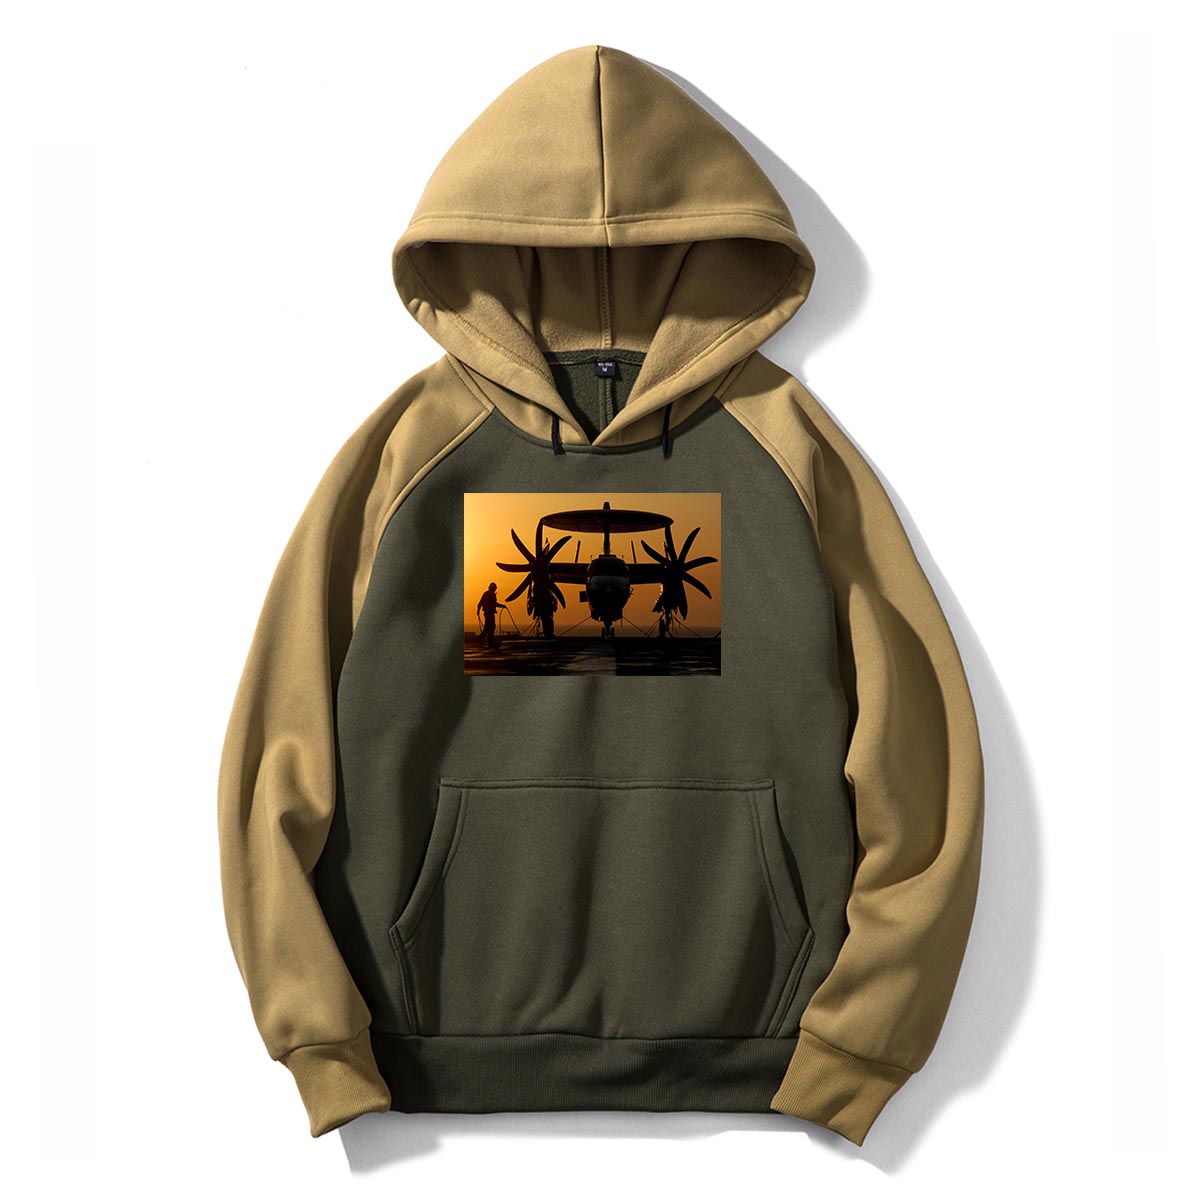 Military Plane at Sunset Designed Colourful Hoodies